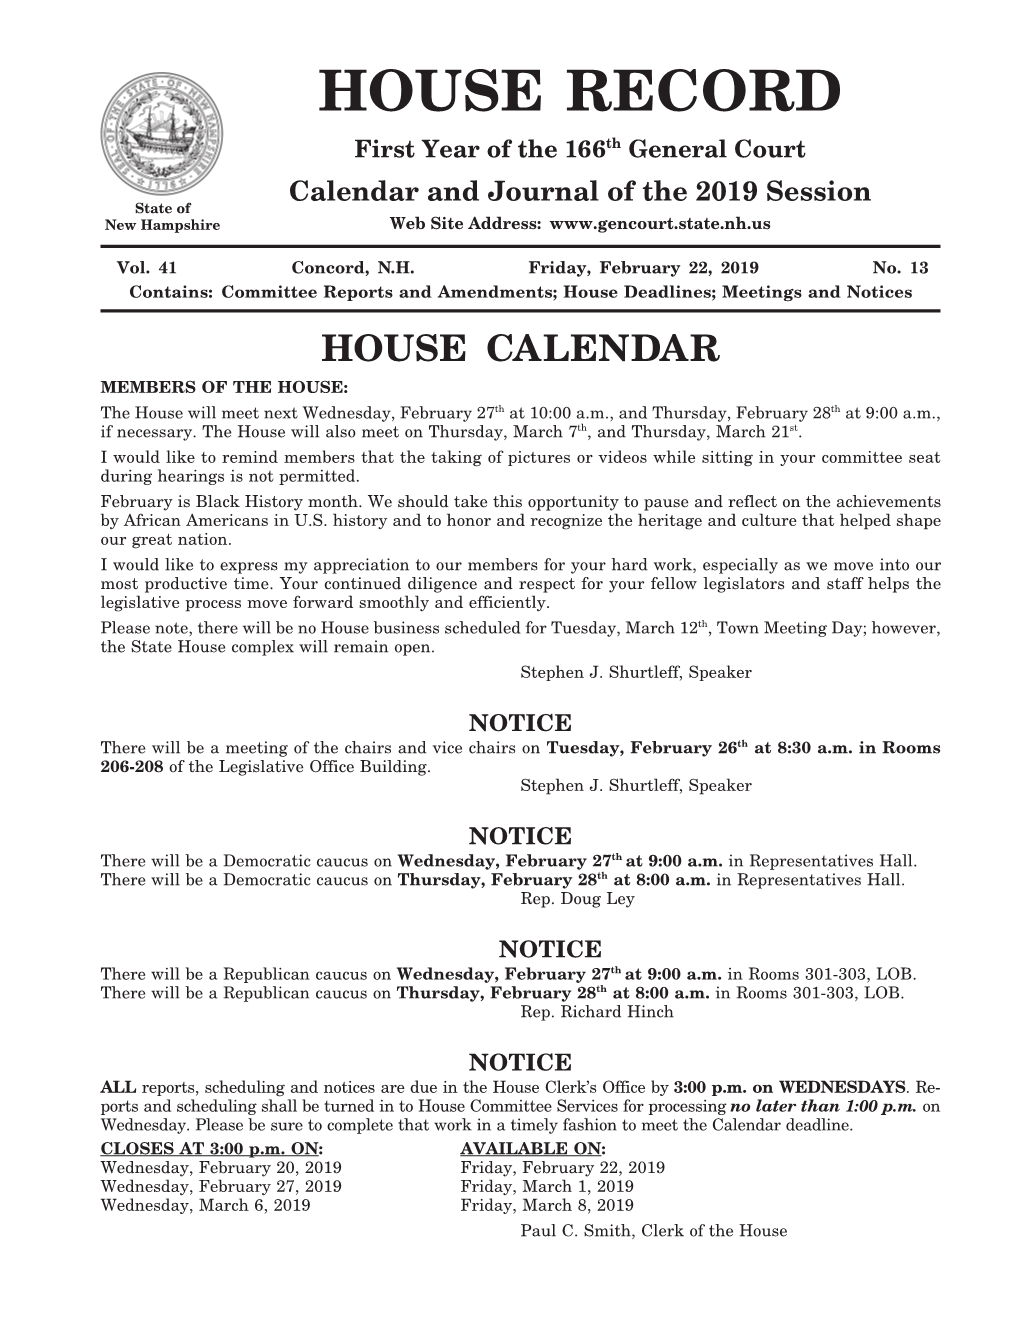 HOUSE CALENDAR MEMBERS of the HOUSE: the House Will Meet Next Wednesday, February 27Th at 10:00 A.M., and Thursday, February 28Th at 9:00 A.M., If Necessary